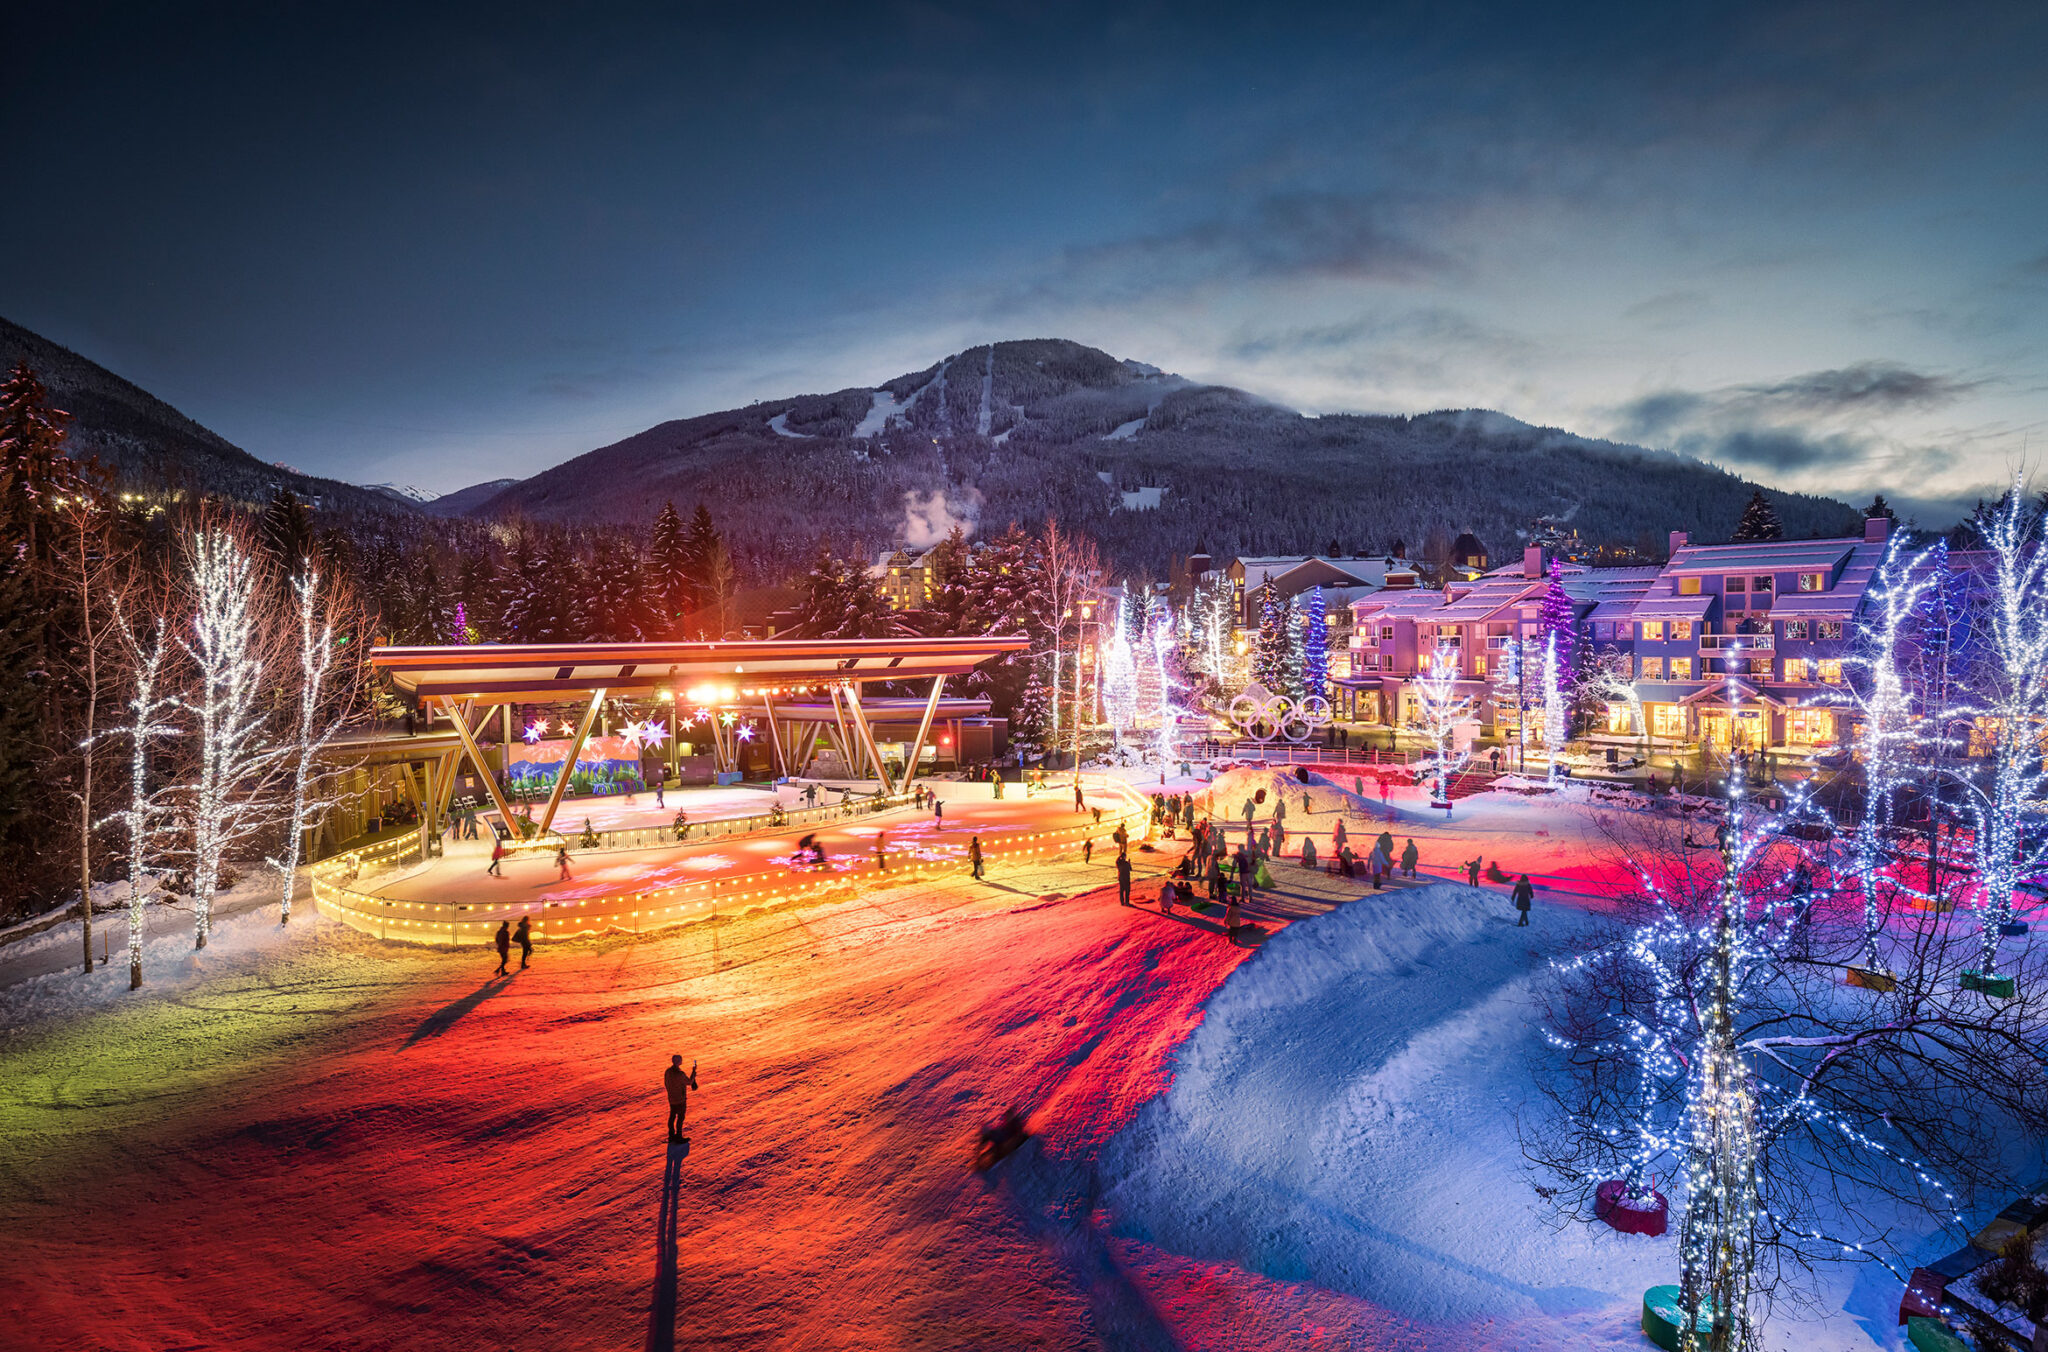 A shot of Whistler Olympic Plaza at nighttime in the winter. There are beautiful lights around the outdoor ice rink and trees, with Whistler Mountain in the background.